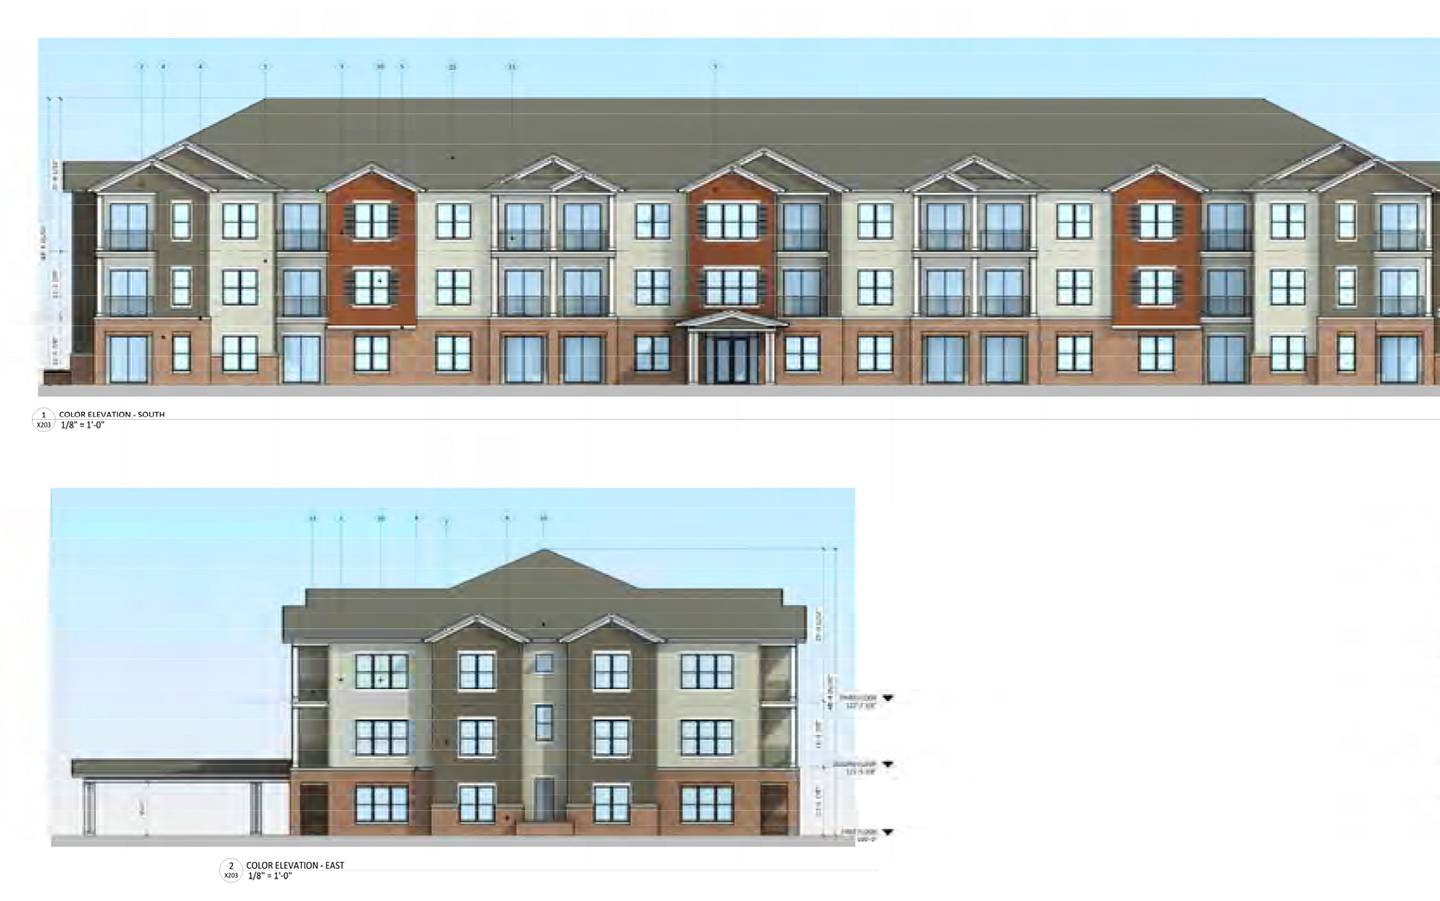 The Fox Home Senior Living facility is to be located at West Veterans Parkway and Sycamore Road. It will comprise 36 one-bedroom and 12 two-bedroom units, according to documents.